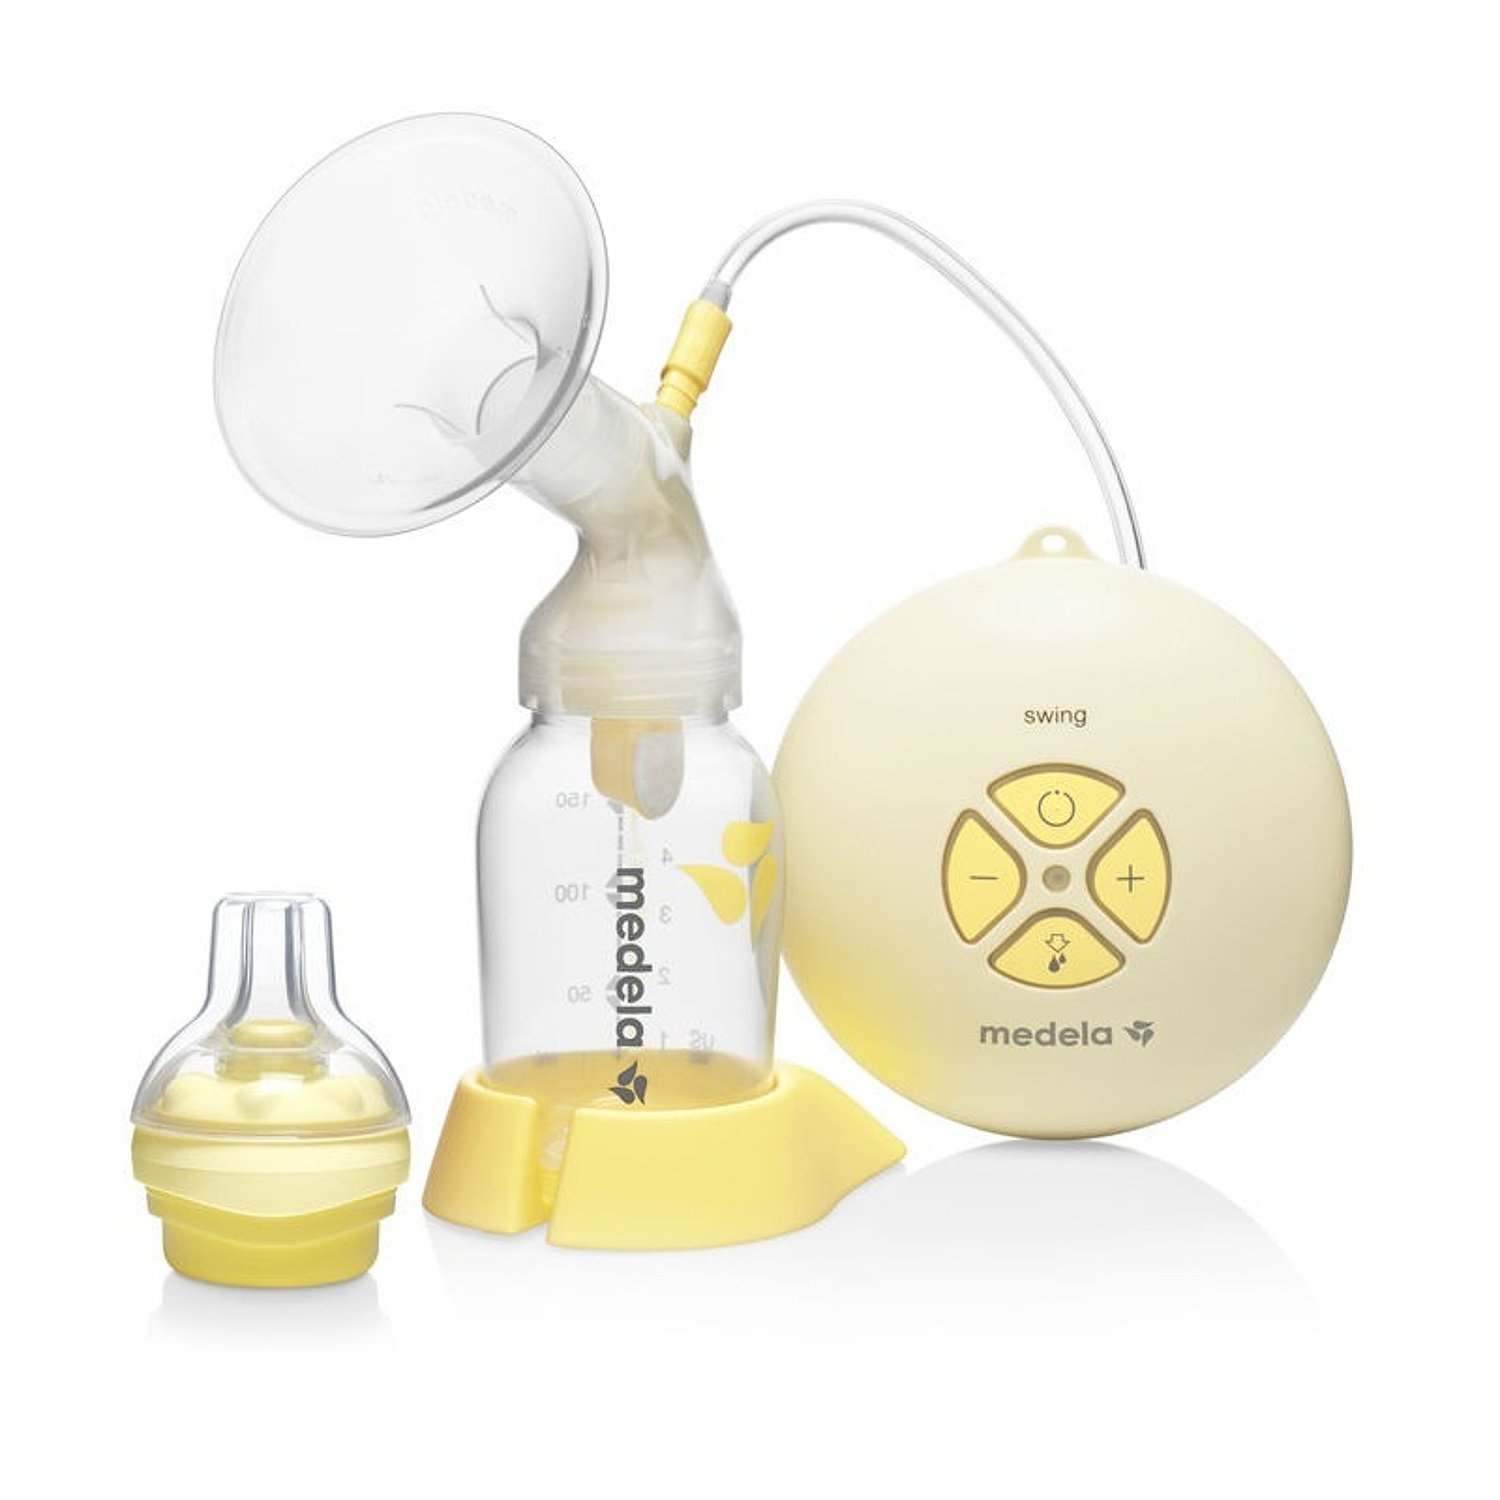 http://f.igtrend.kz/products/001/214/medela_molokootsos_swing_1.jpg